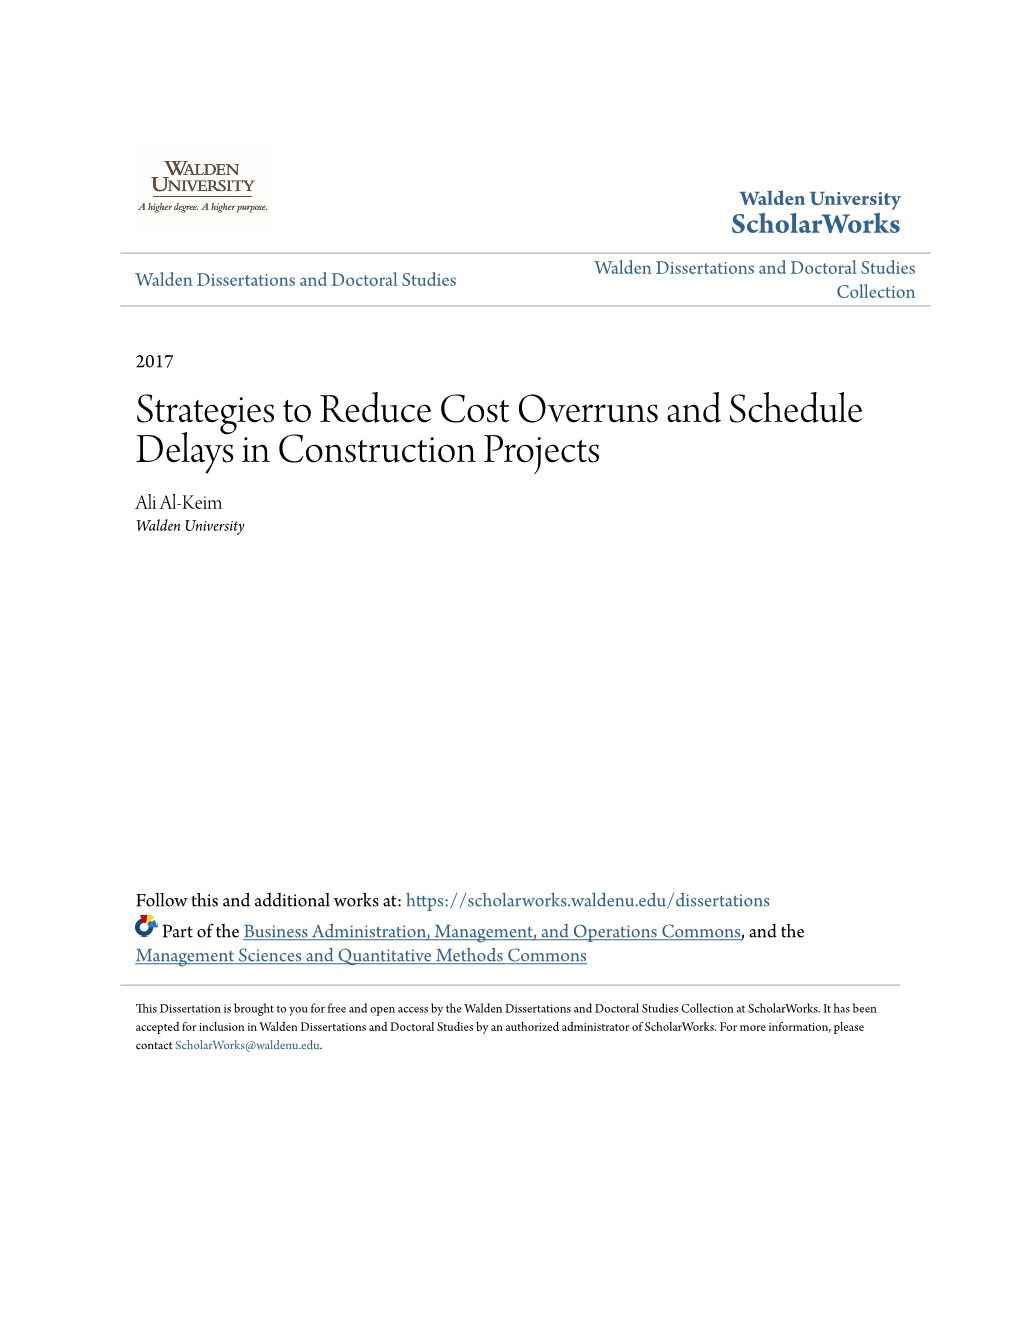 Strategies to Reduce Cost Overruns and Schedule Delays in Construction Projects Ali Al-Keim Walden University